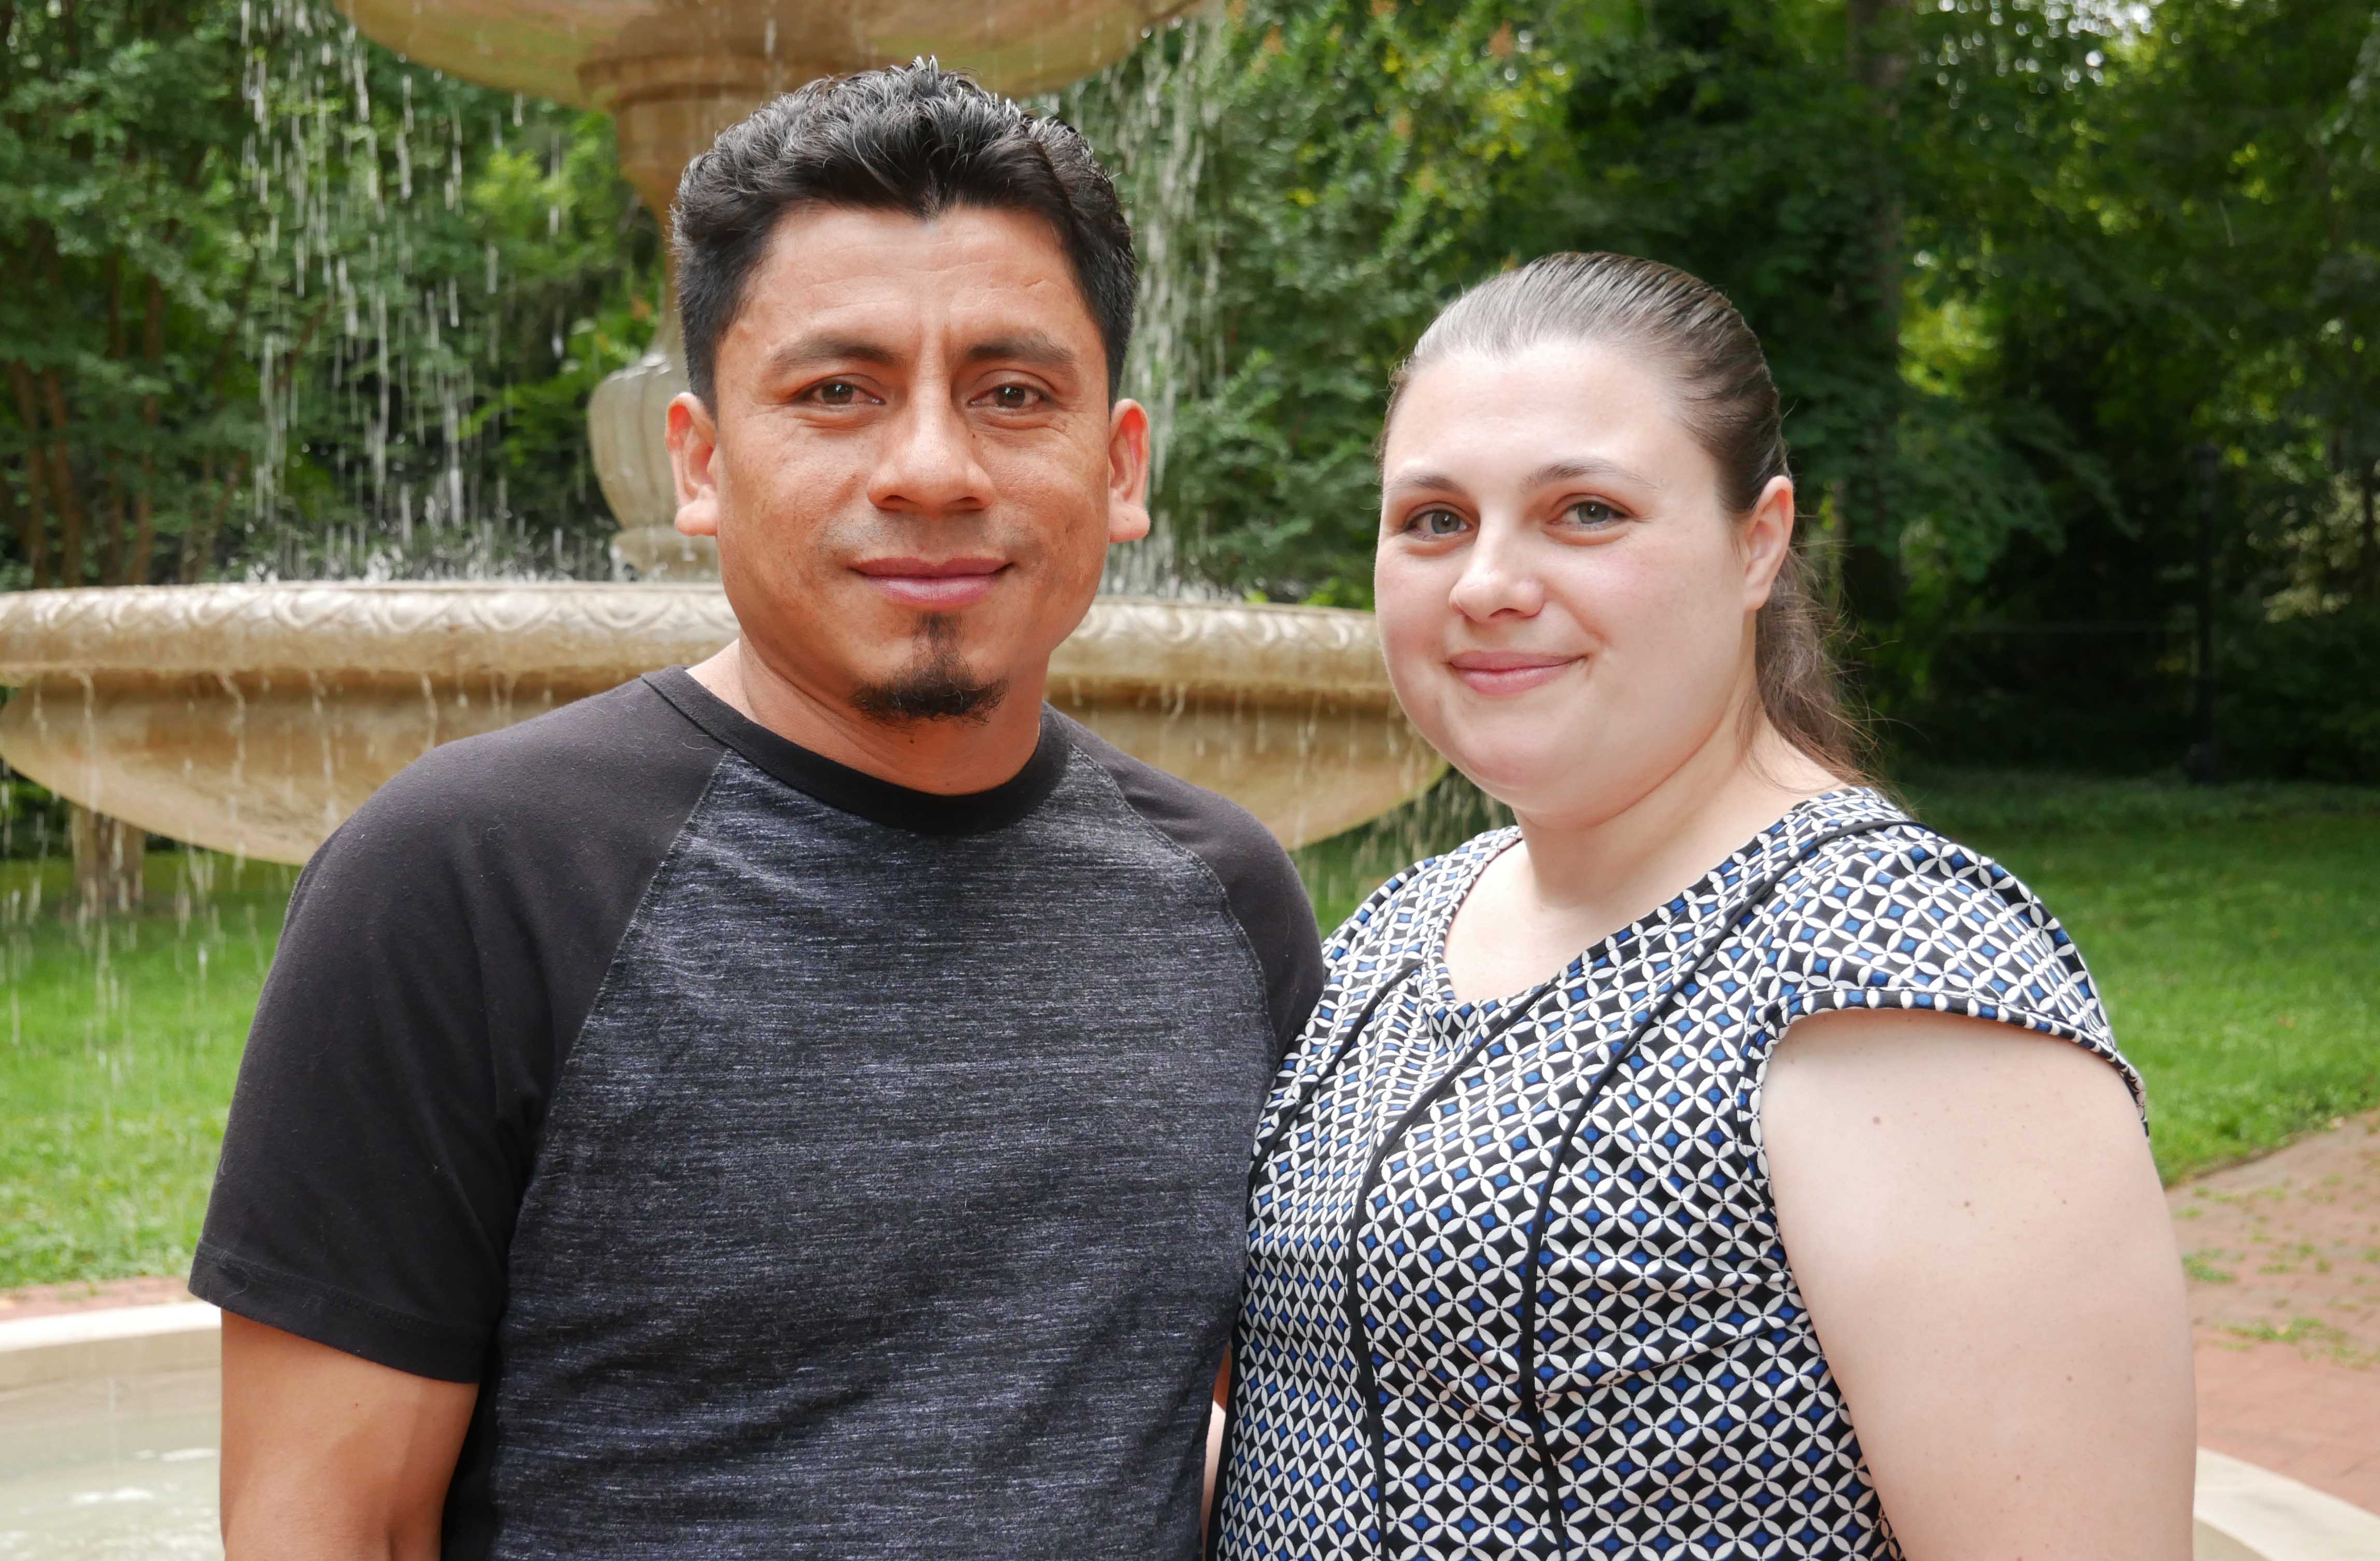 Elmer (left) and Alyse (right) Sanchez are standing in front of a water fountain with green trees behind them.